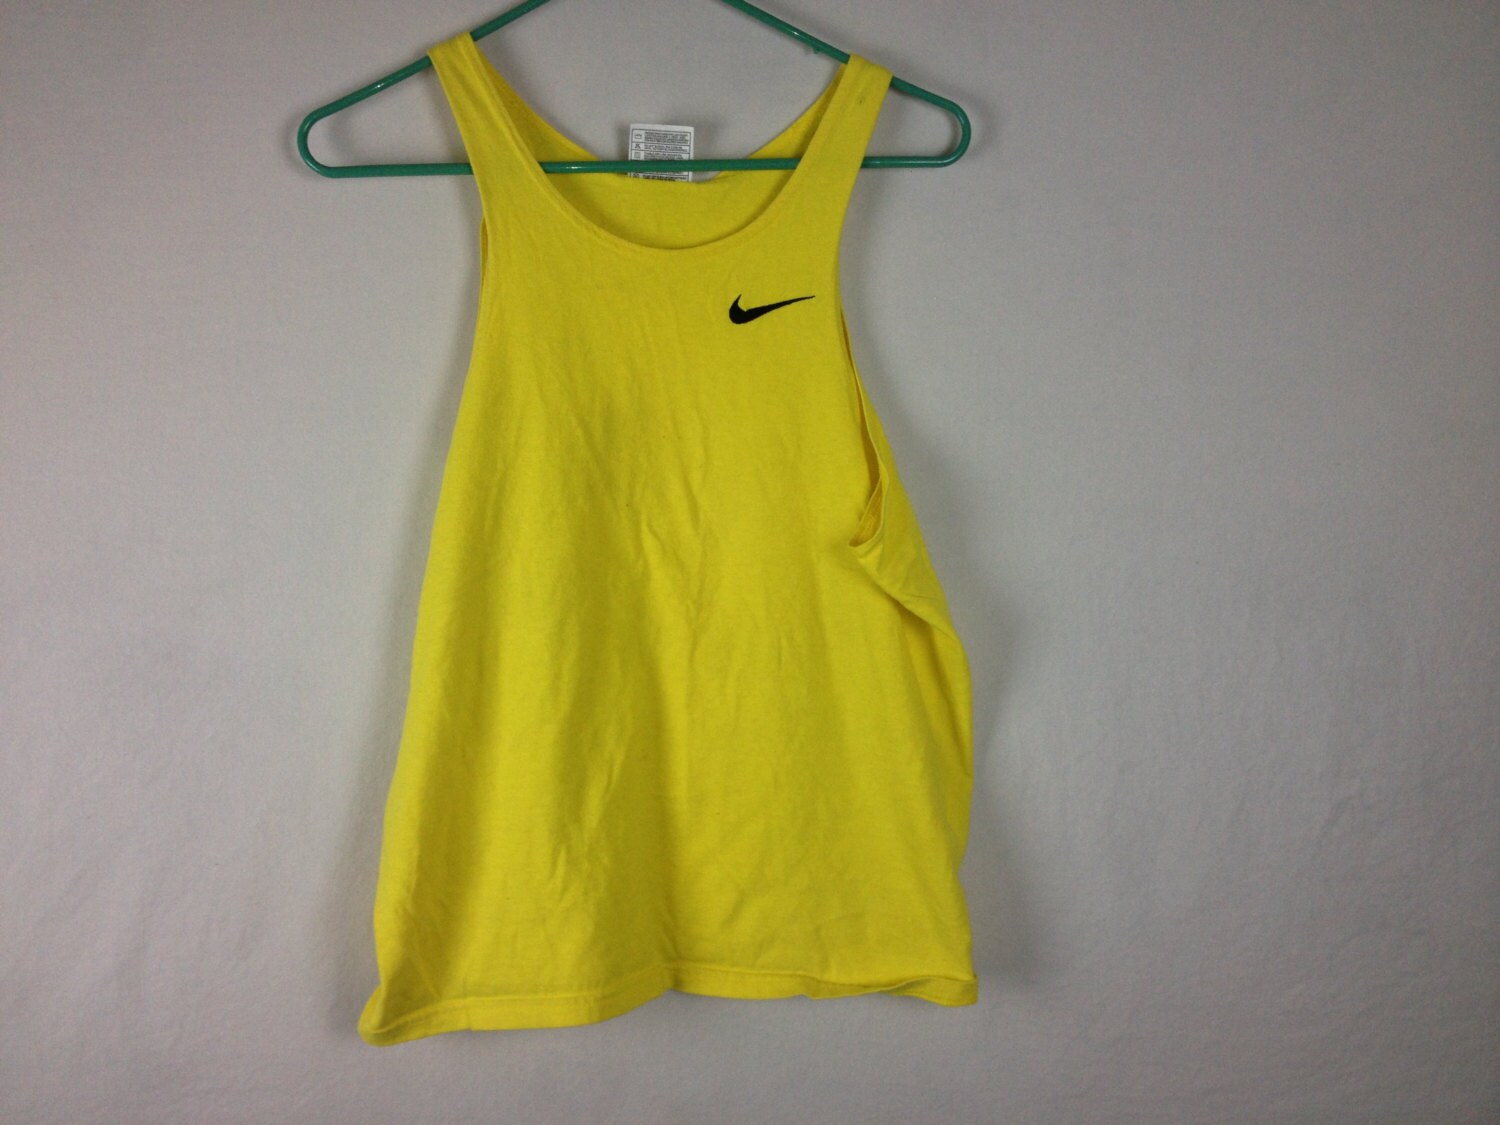 nike athletic bright yellow tank top by sadgurlclothes on Etsy